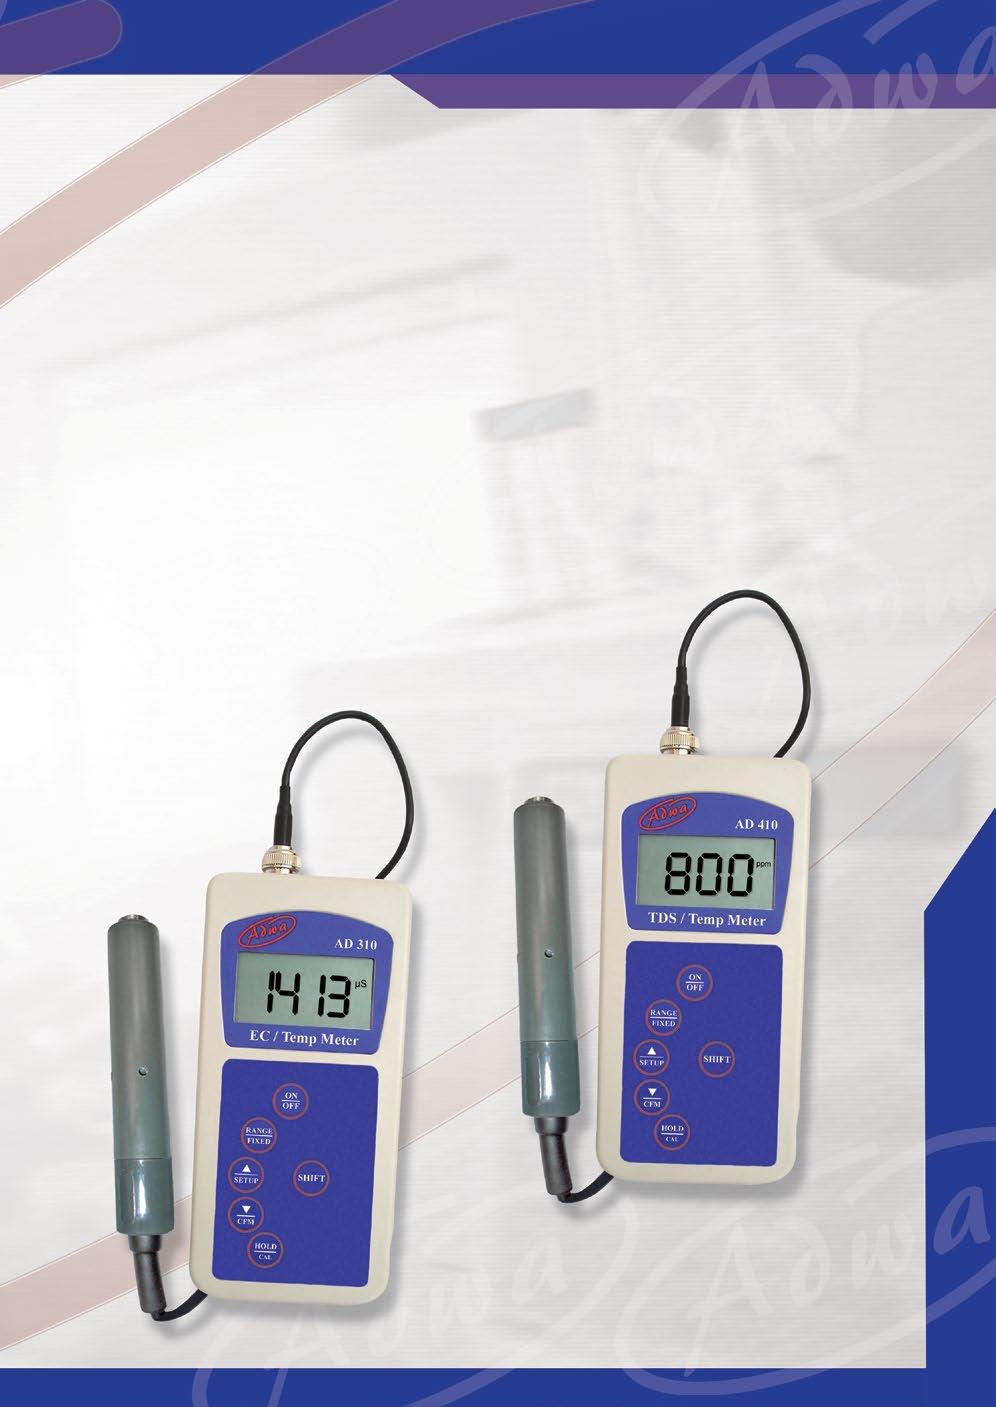 AD310-AD410 Standard Professional Conductivity-TDS-arature Portable Meters AD310 and AD410 are portable microprocessor-based instruments for measuring EC or TDS, and temperature.